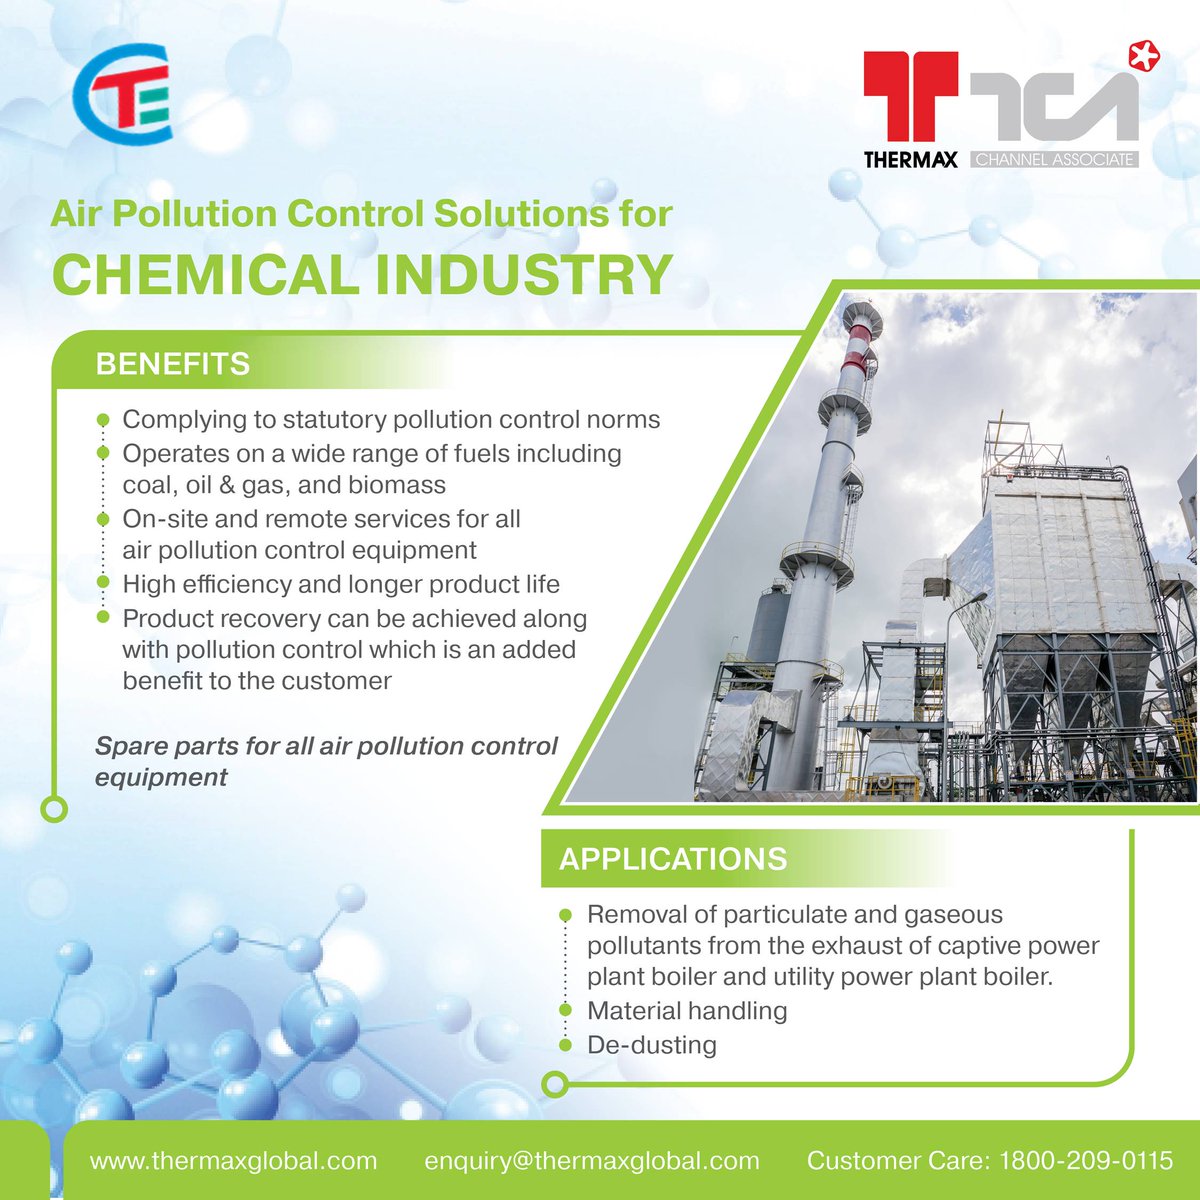 #thermtech Thermax Air pollution Control Solutions have superior resource capabilities to match the global quality standards and meet the ever-changing customer demands.
#Thermax #AcceleratingSustainabilityTogether #chemicalindustry #bagfilter #environment #cleanair #thermtech